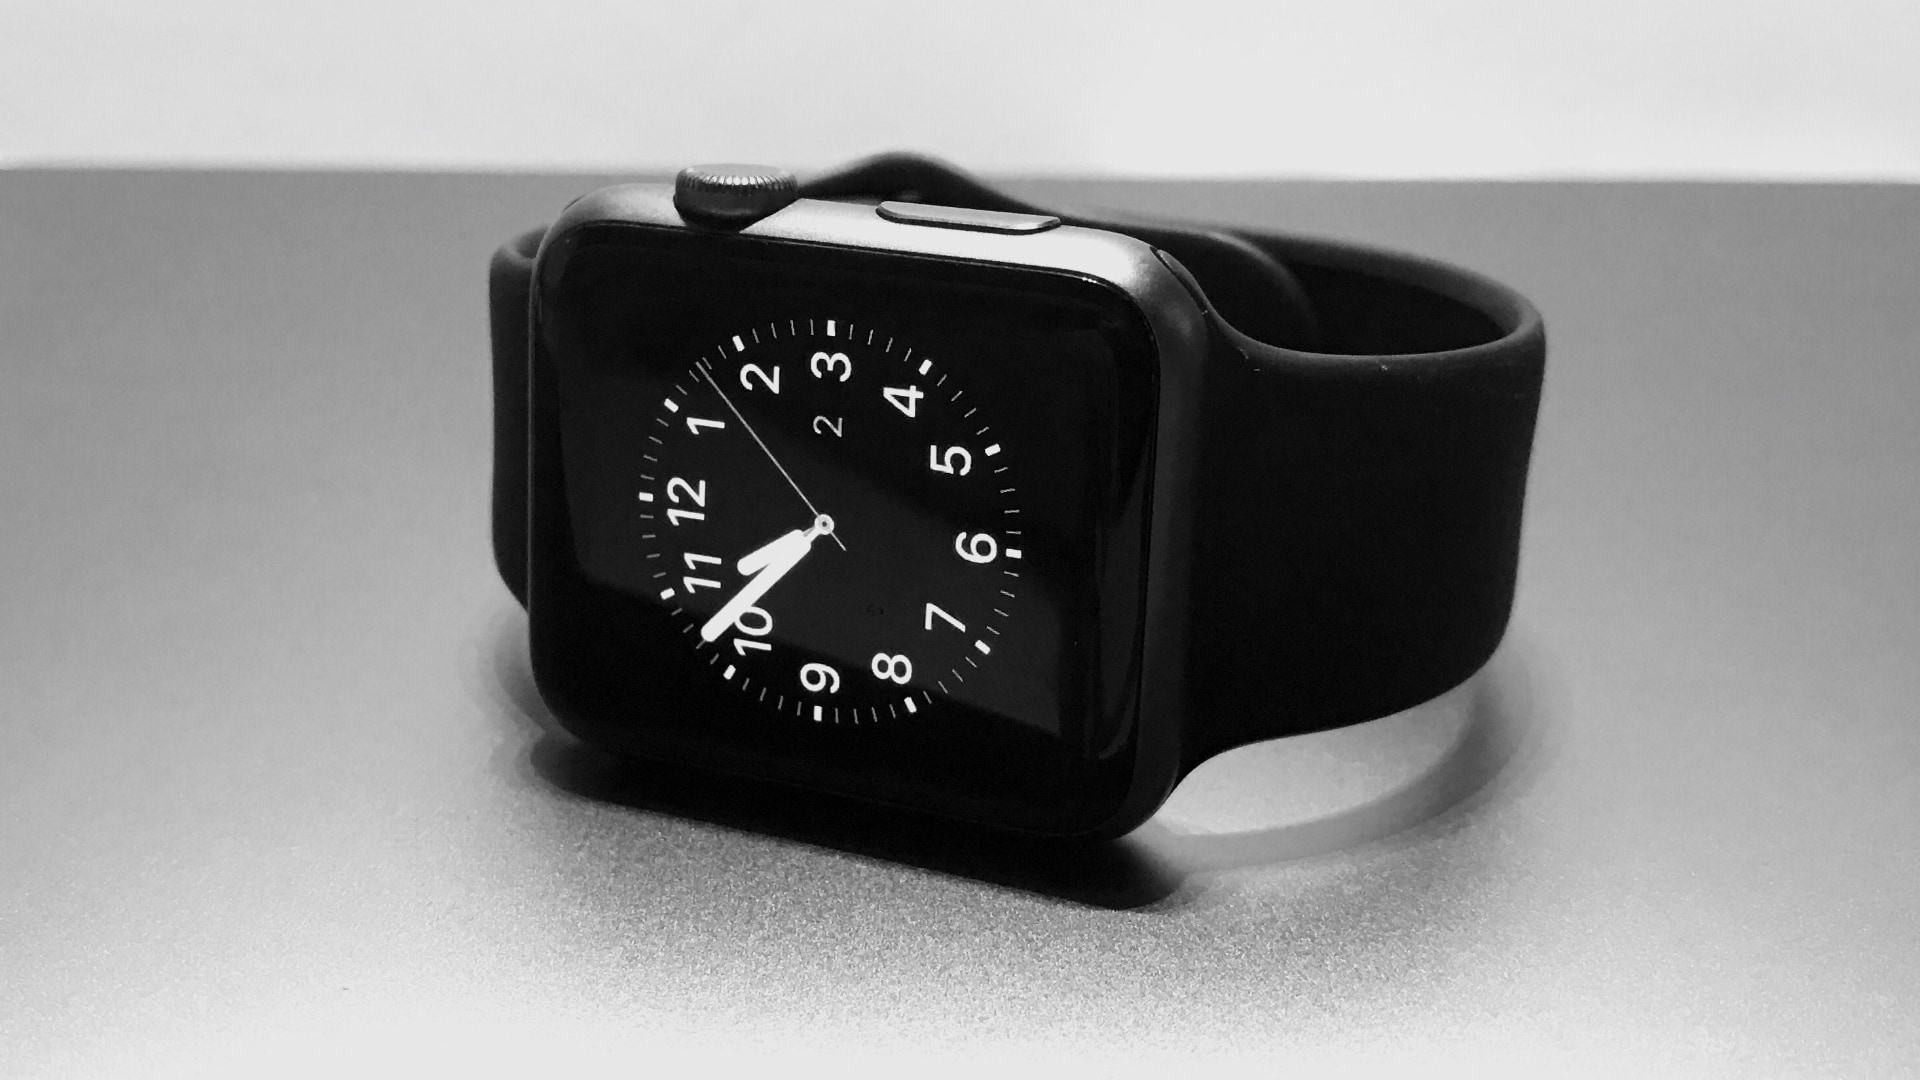 Black Apple Watch with black sports band, sitting on its side